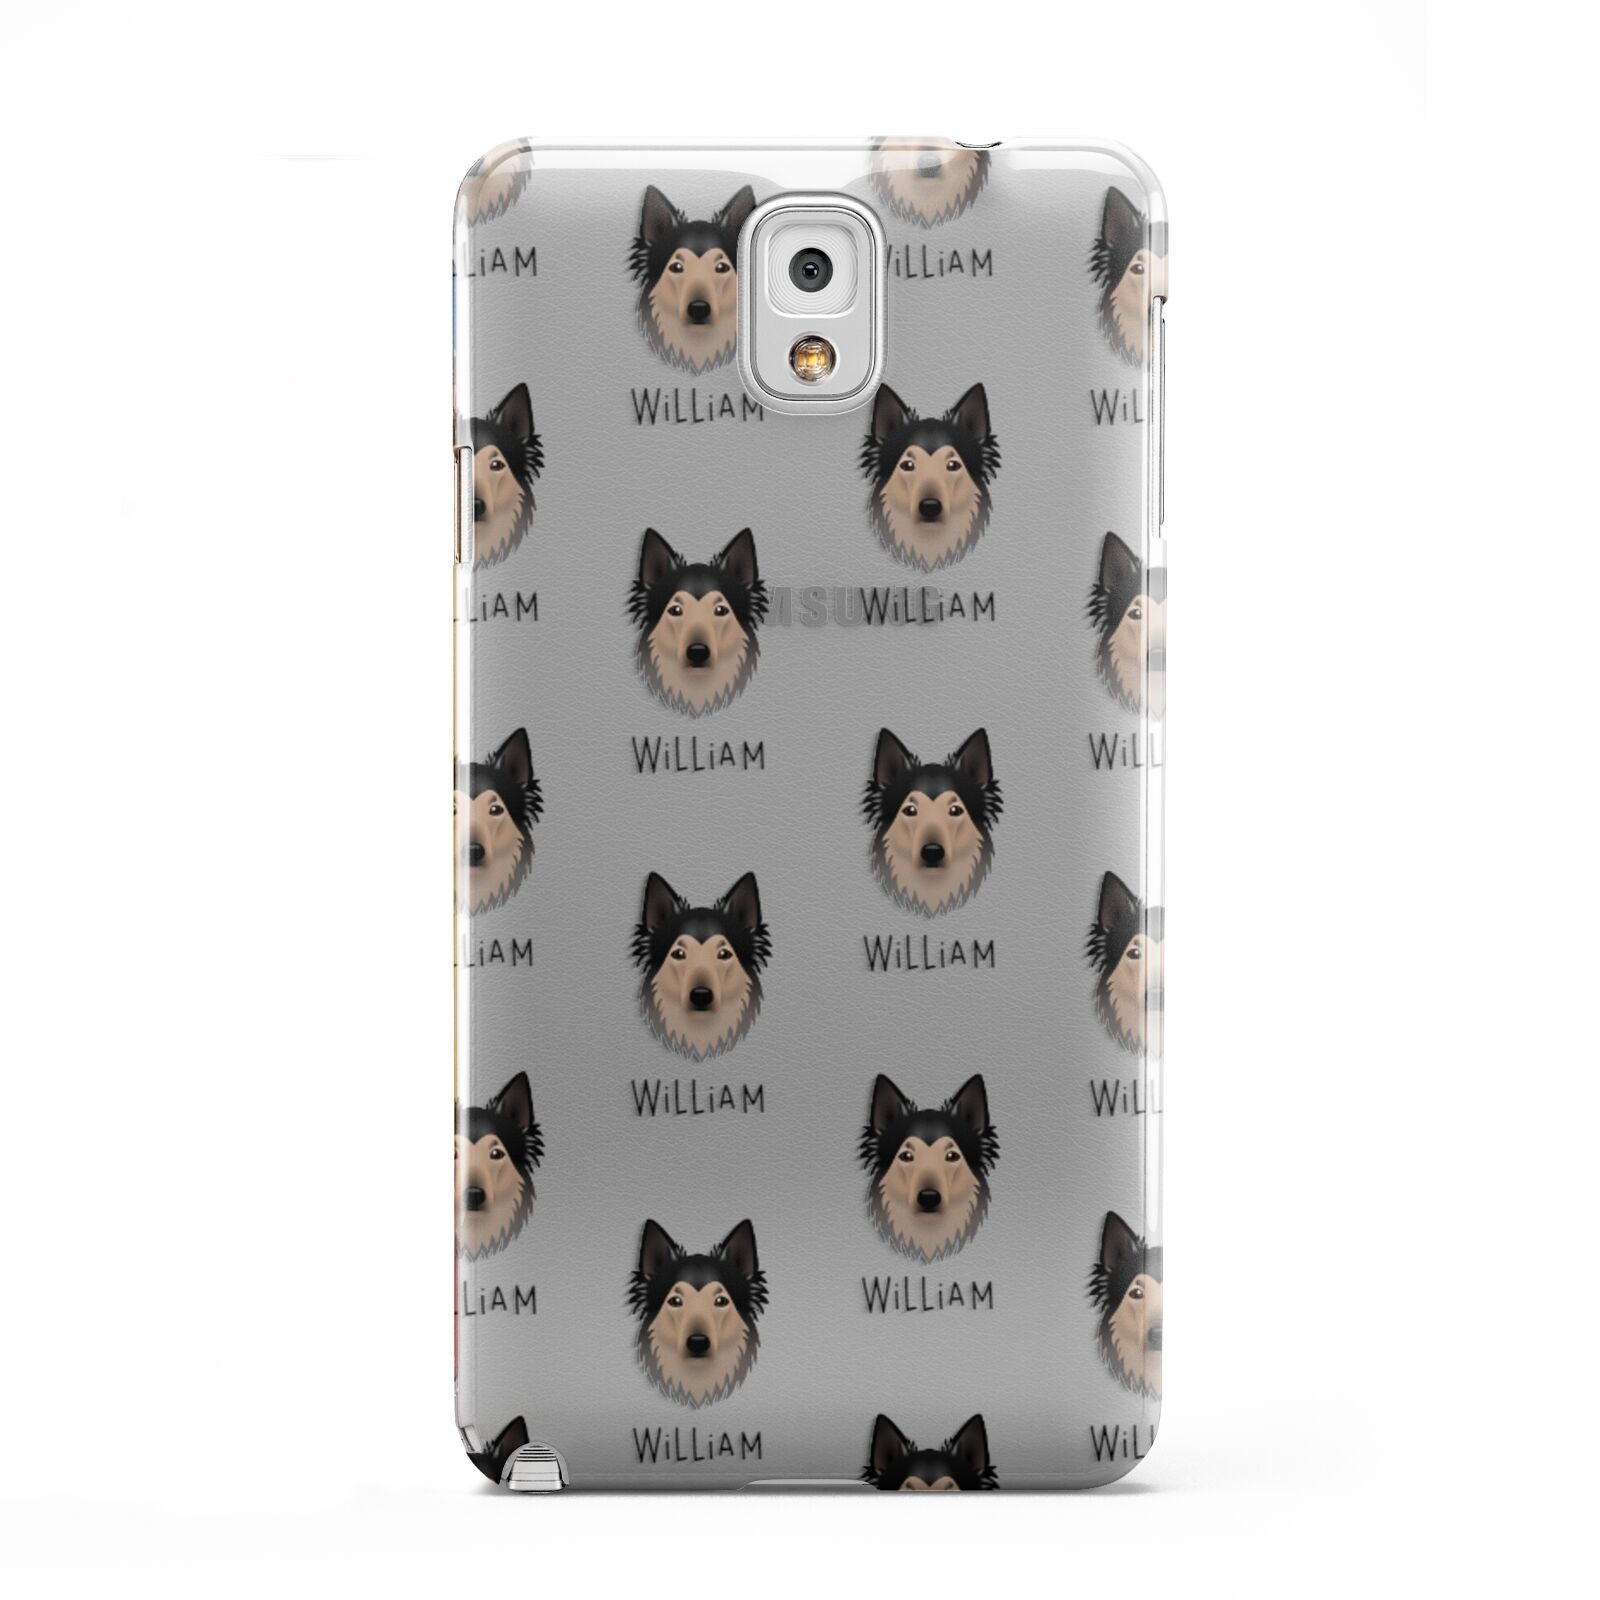 Shollie Icon with Name Samsung Galaxy Note 3 Case